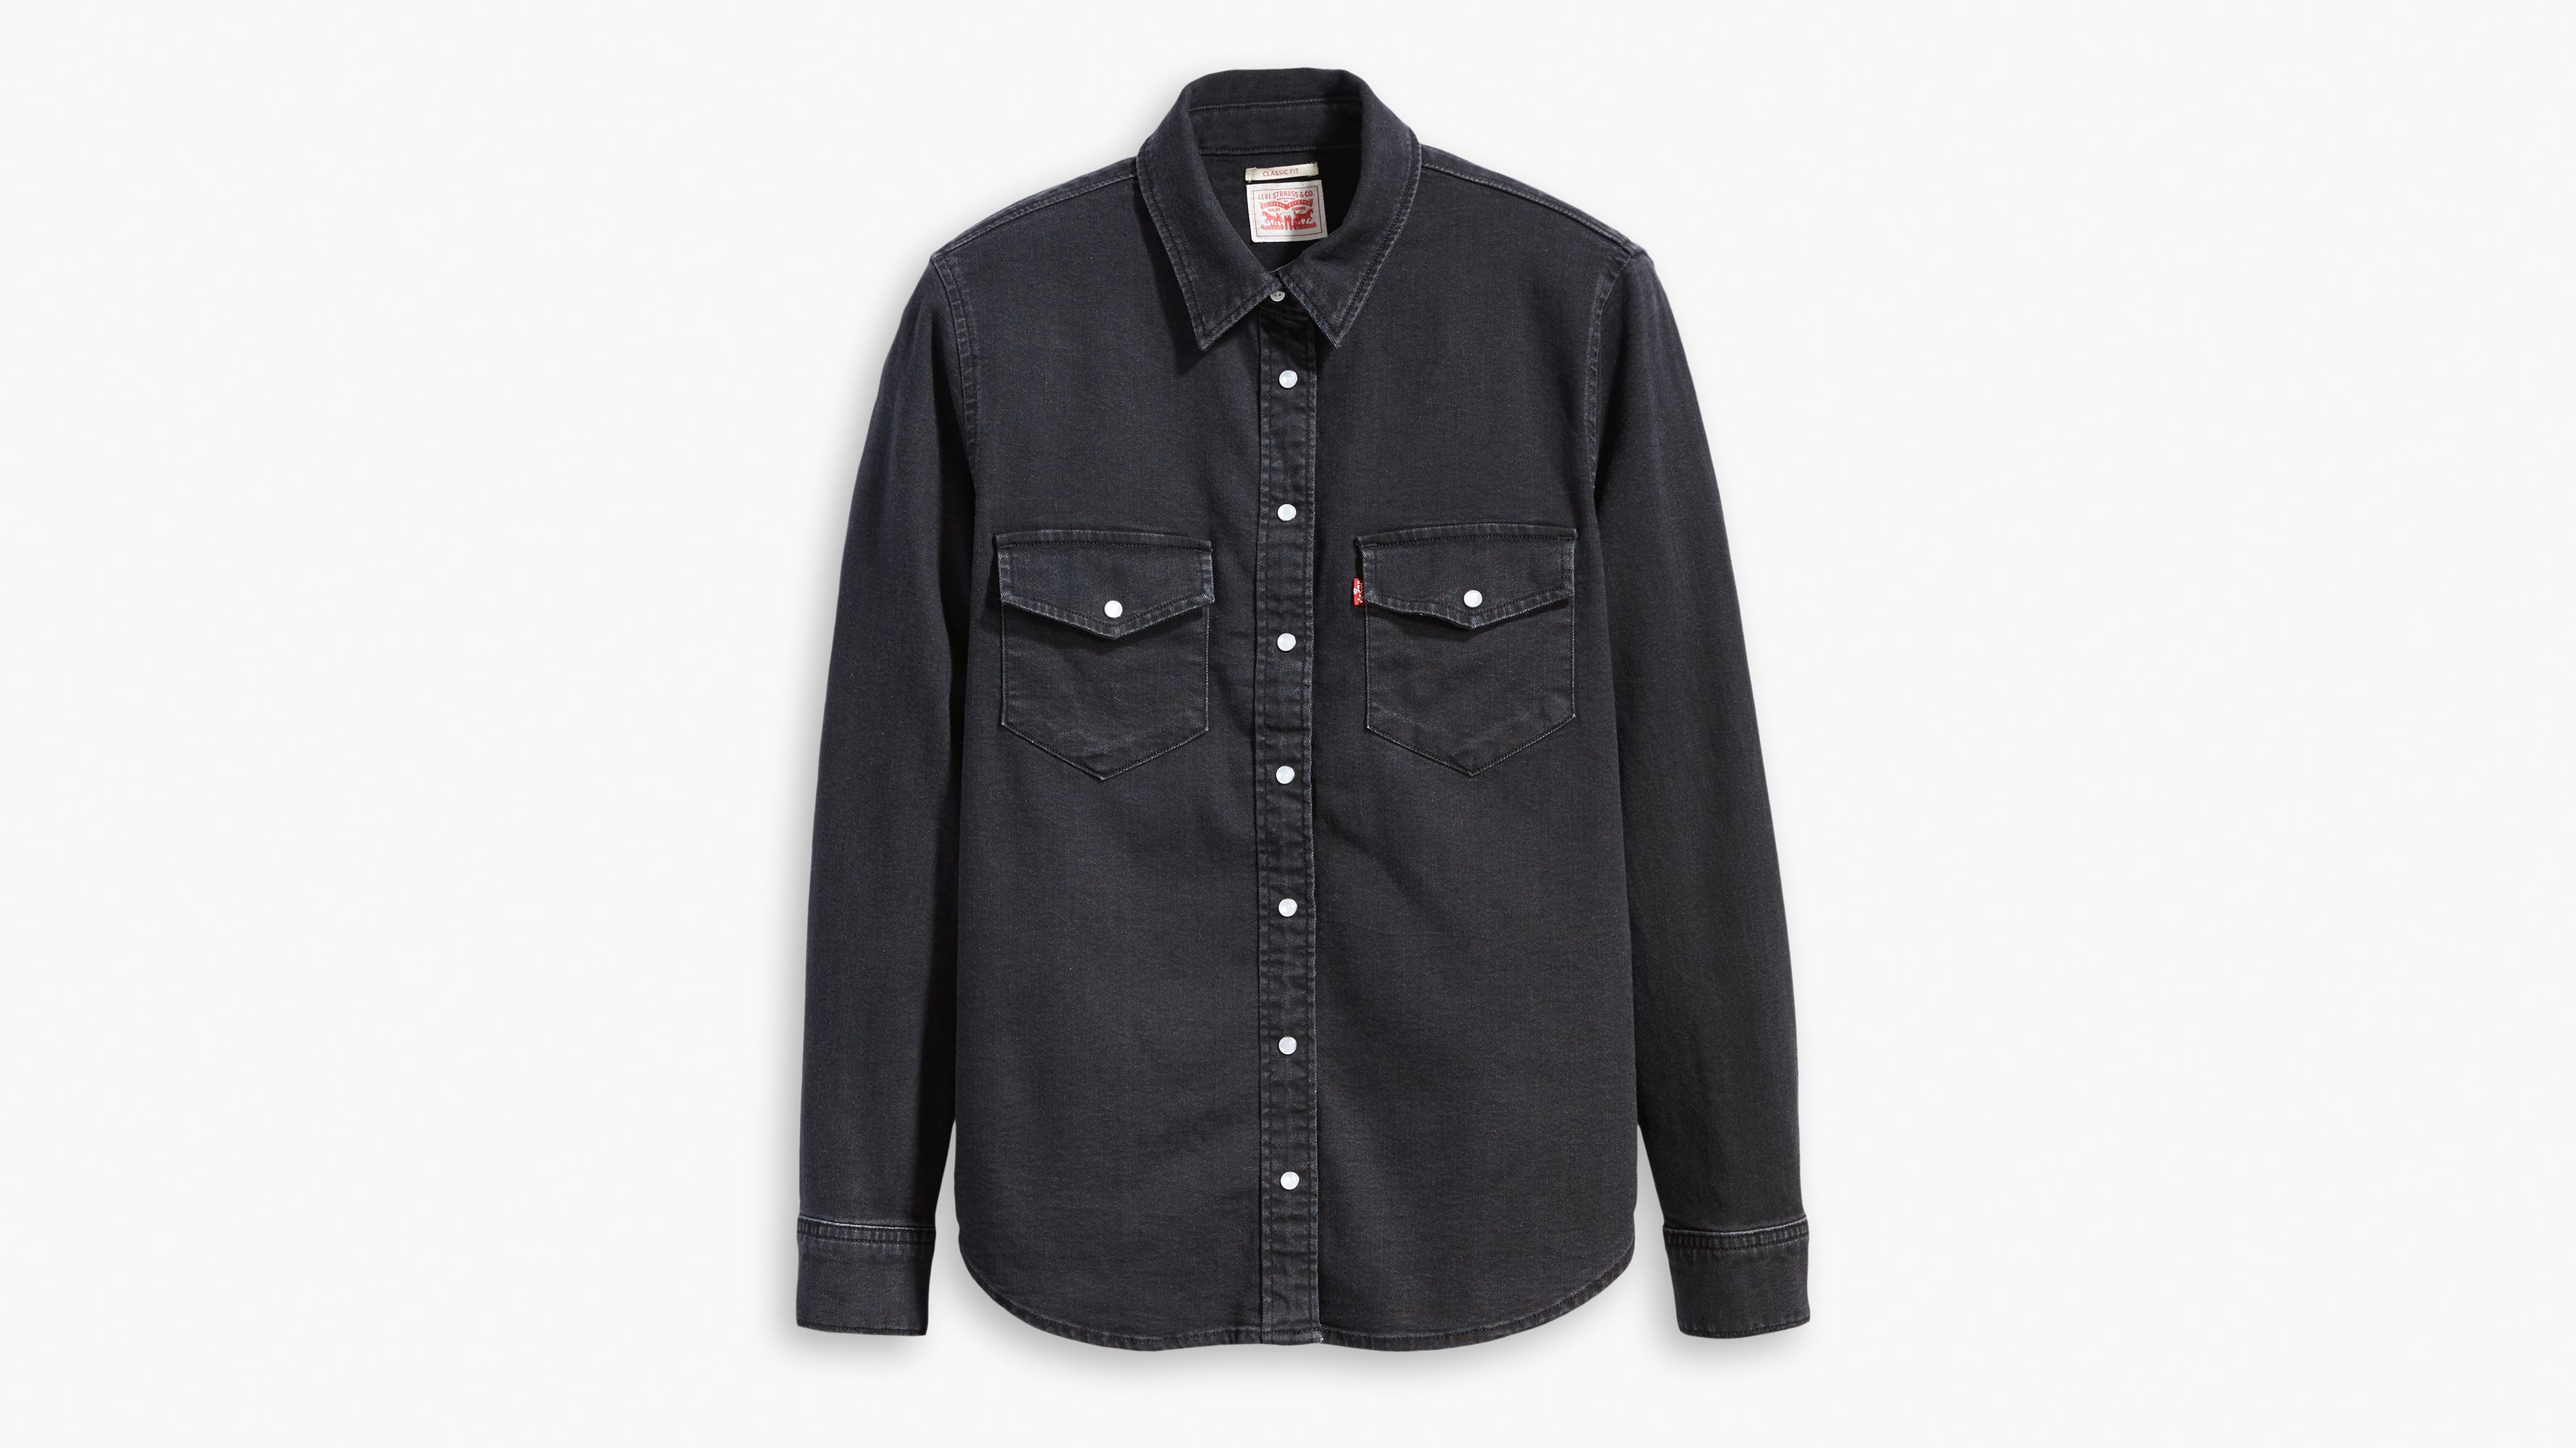 Relaxed Fit Western Shirt - White | Levi's® US